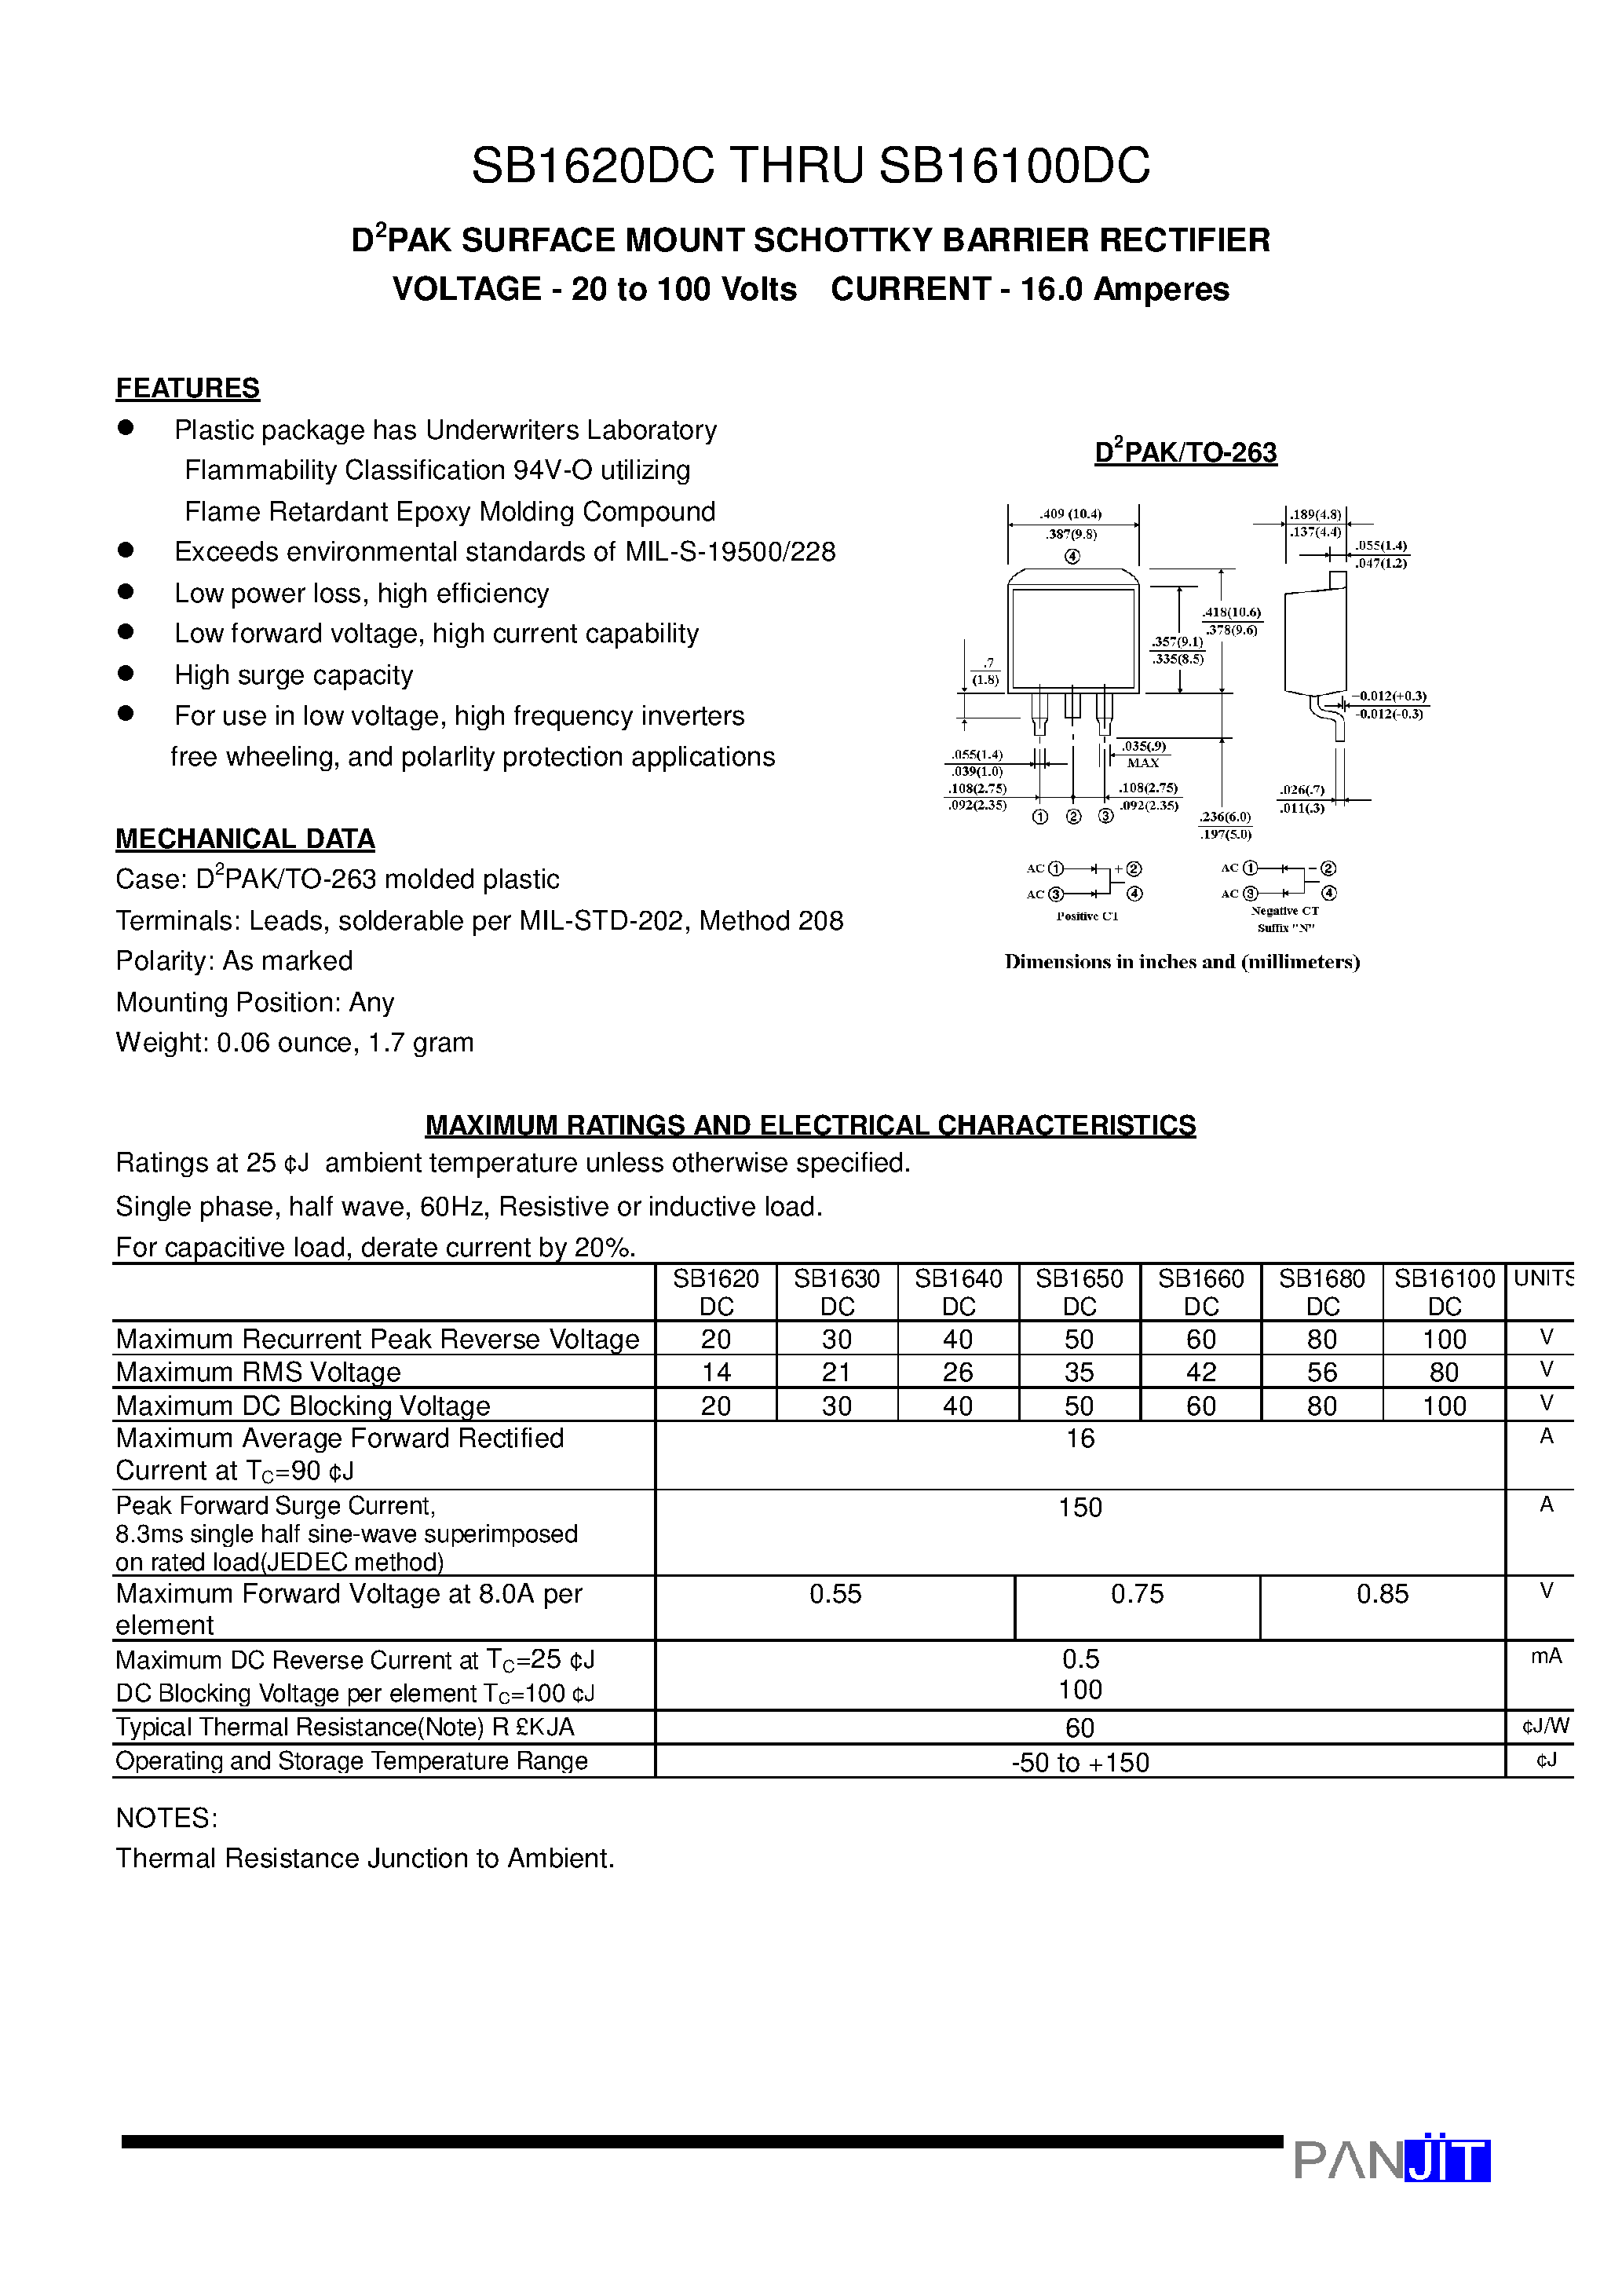 Datasheet SB1660DC - D2PAK SURFACE MOUNT SCHOTTKY BARRIER RECTIFIER(VOLTAGE - 20 to 100 Volts CURRENT - 16.0 Amperes) page 1